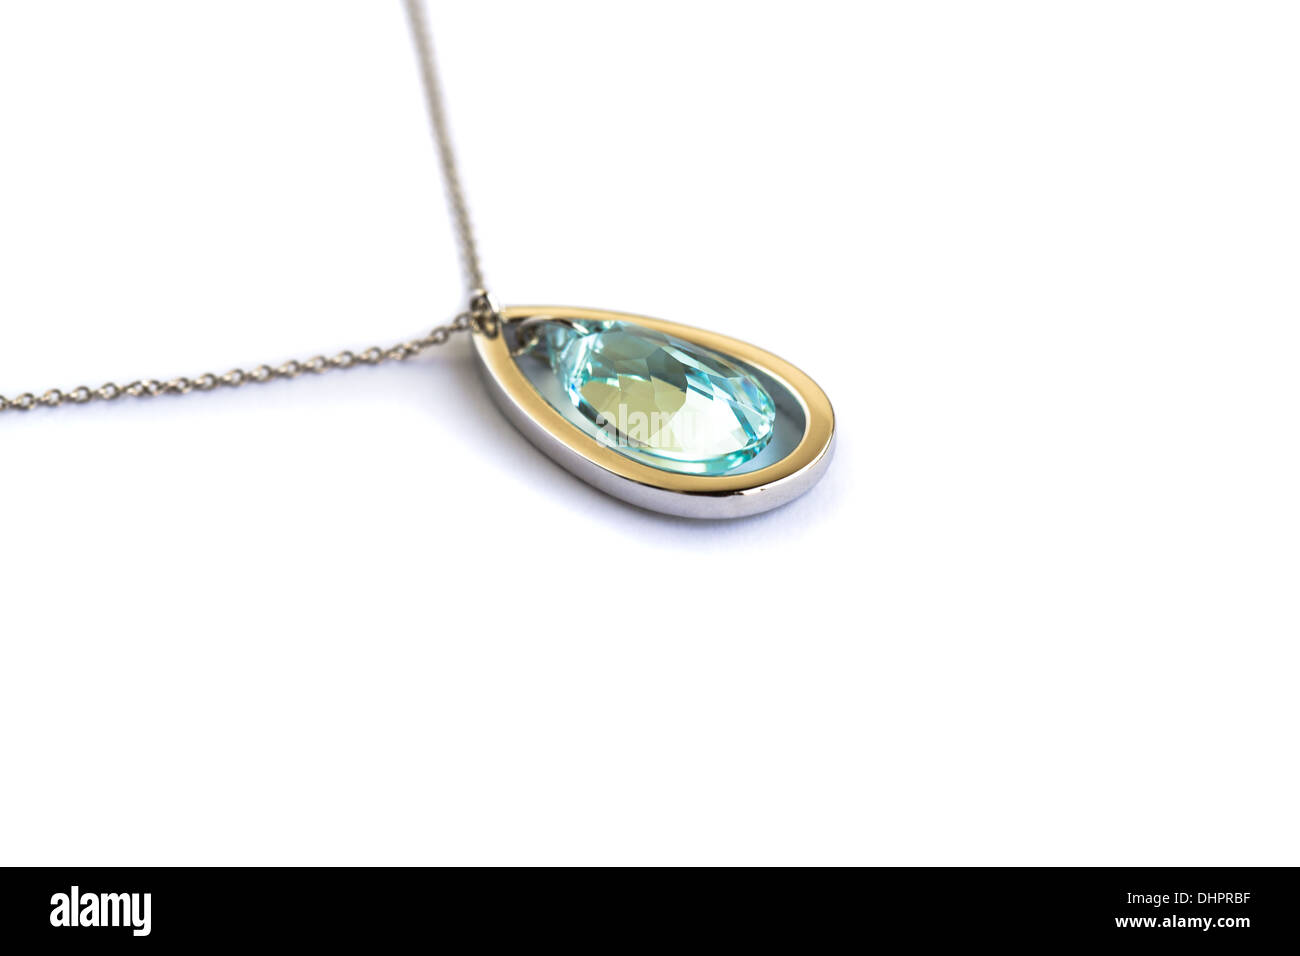 Necklace with blue stone isolated on white background. Stock Photo